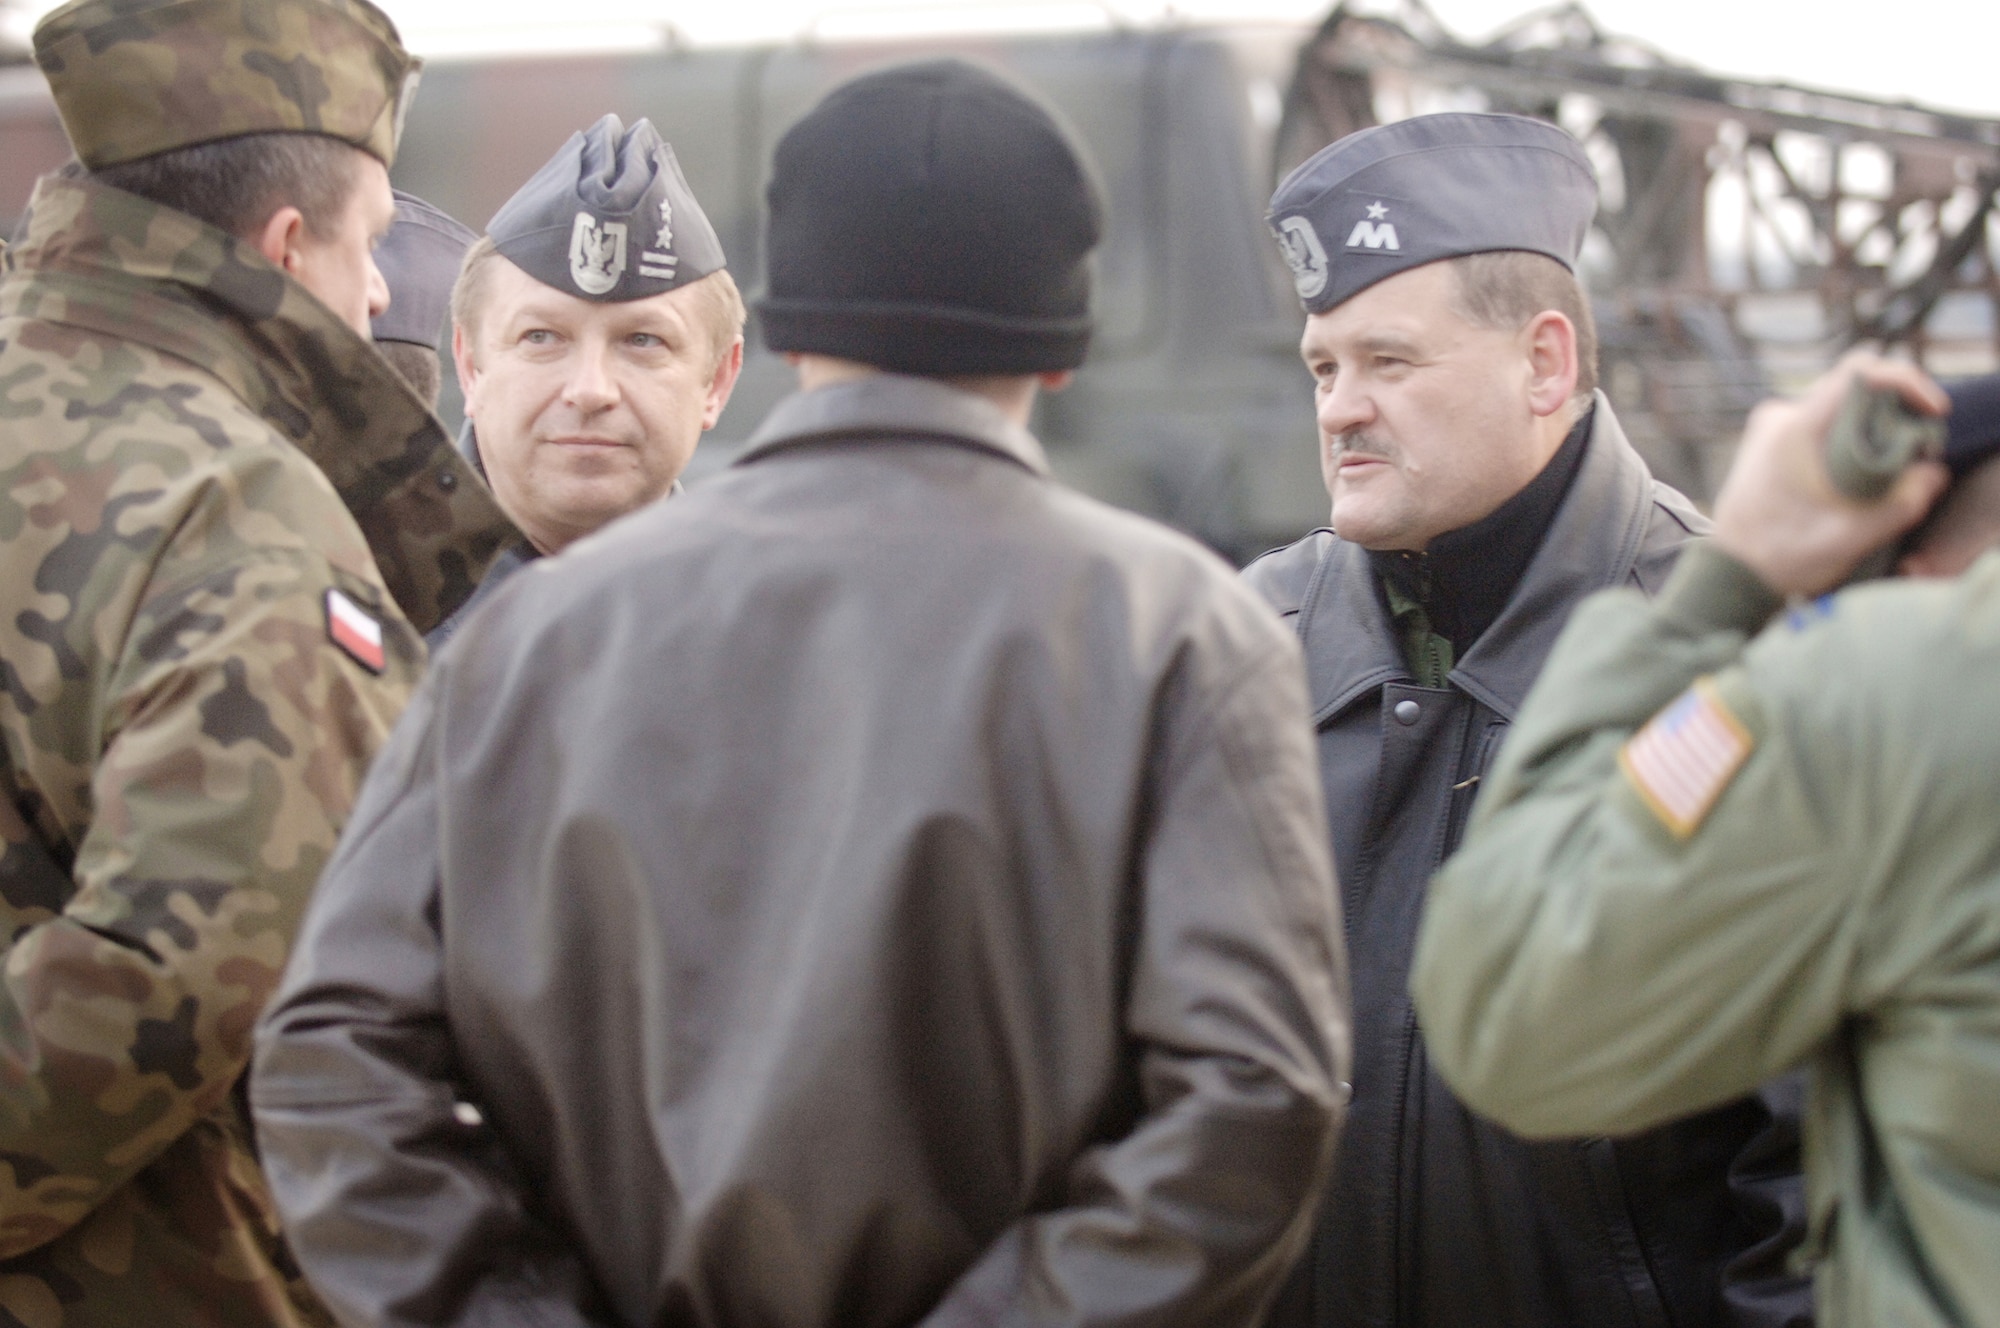 American Airmen talk to Polish air force Brig. Gen. Tadeusz Mikutel (second from left) and Polish air force Lt Col Mieczyslaw Gaudyn (right) after delivering a C-130E Hercules from Ramstein Air Base, Germany, to its final destination Nov. 2, 2009, at Powidz Air Base, Poland. General Mikutel is the Polish air force's 33rd Air Base commander, and Colonel Gaudyn is the 14th Air Transport Squadron commander. The Ramstein AB aircraft and crew, from the 37th Airlift Squadron, delivered the second U.S. Air Force C-130E to Poland as part of a program for building partnership capacities amongst United States allies. (Defense Department photo/Master Sgt. Scott Wagers)